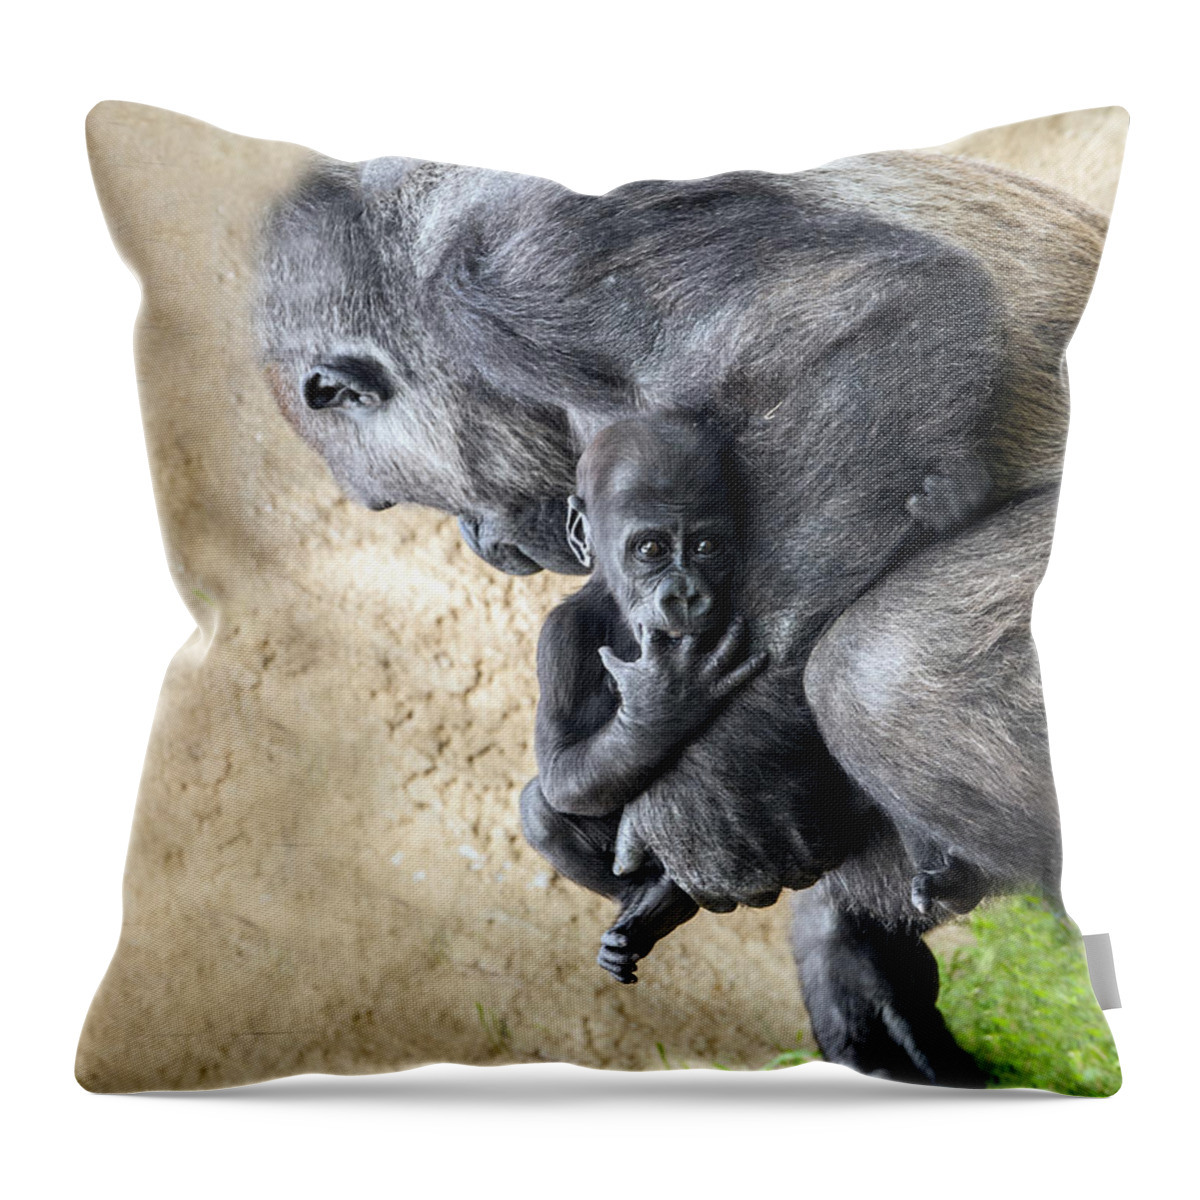 Gorilla Throw Pillow featuring the photograph Baby Gorilla Held By Mama by William Bitman